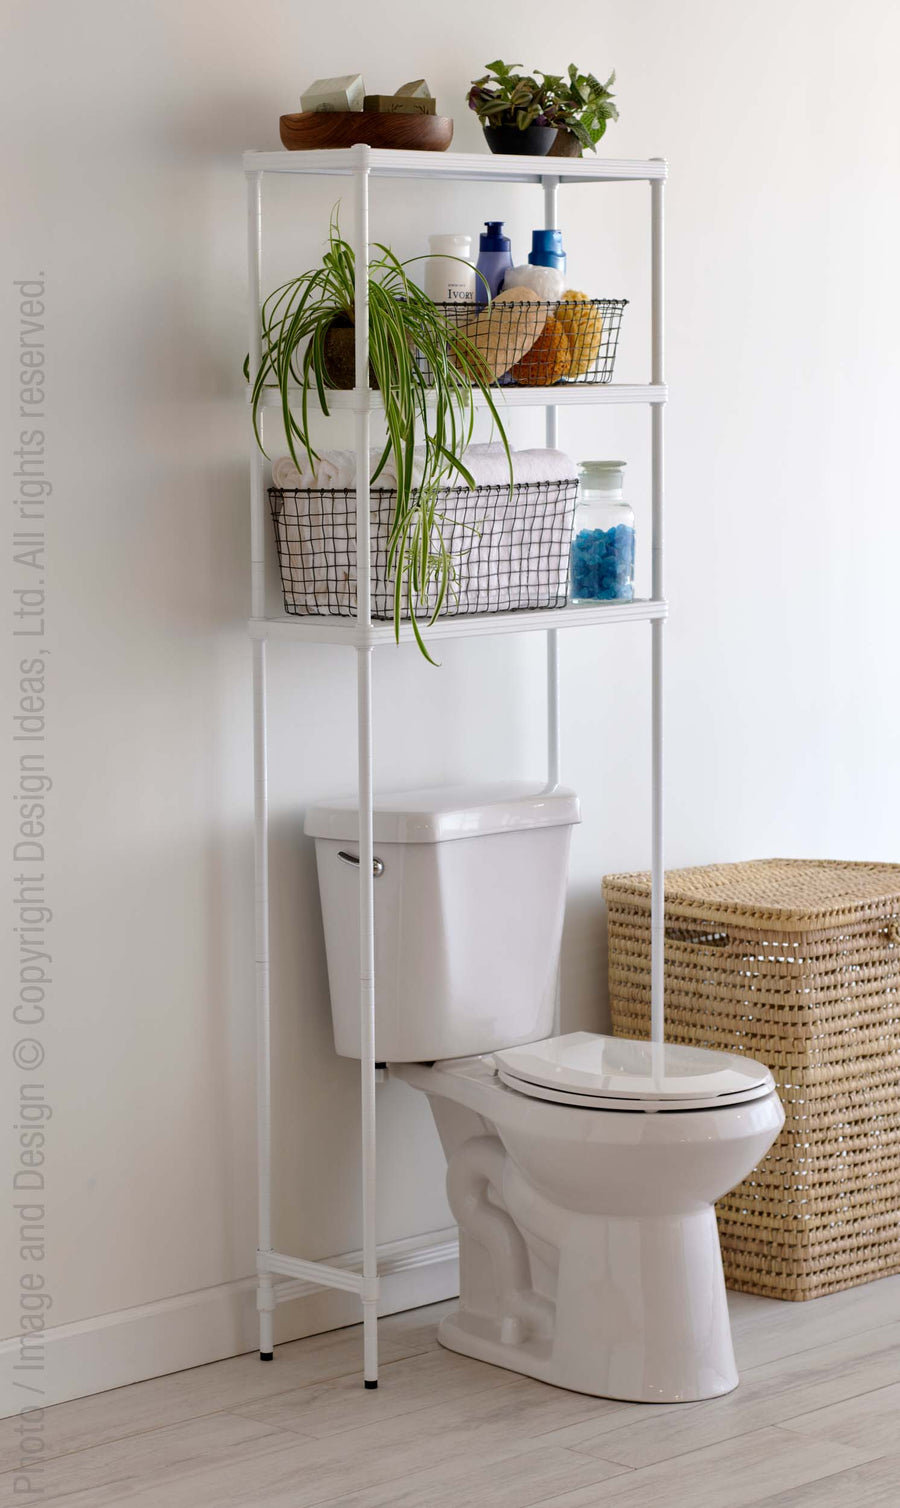 MeshWorks® bathroom unit - White | Image 1 | Premium Shelving from the MeshWorks collection | made with Iron for long lasting use | Design Ideas